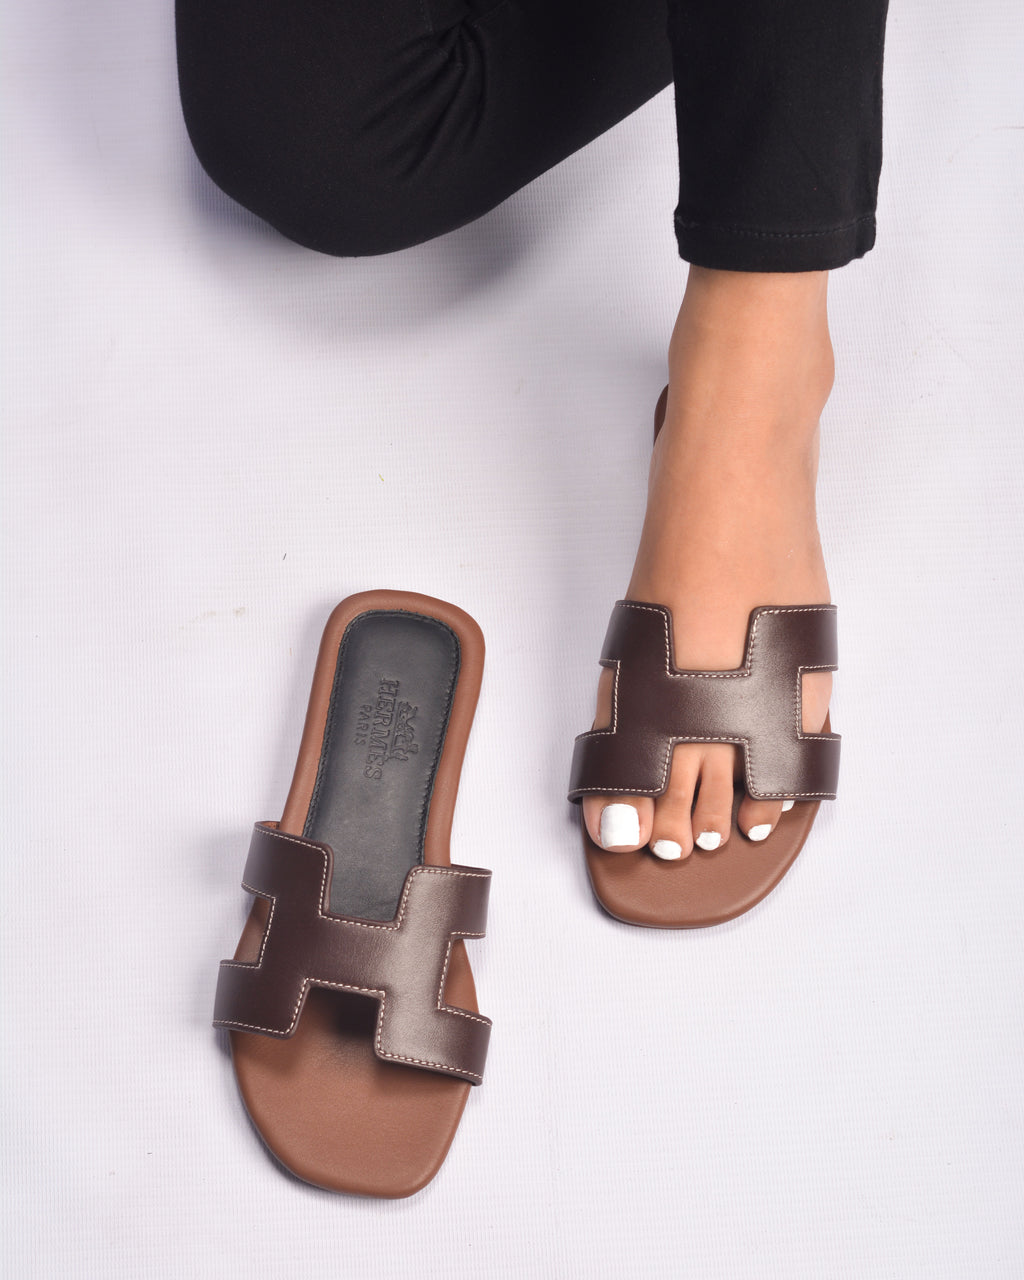 H CUT-OUT WOMEN ORAN SANDAL NEW BROWN WITH  BLACK LOWER